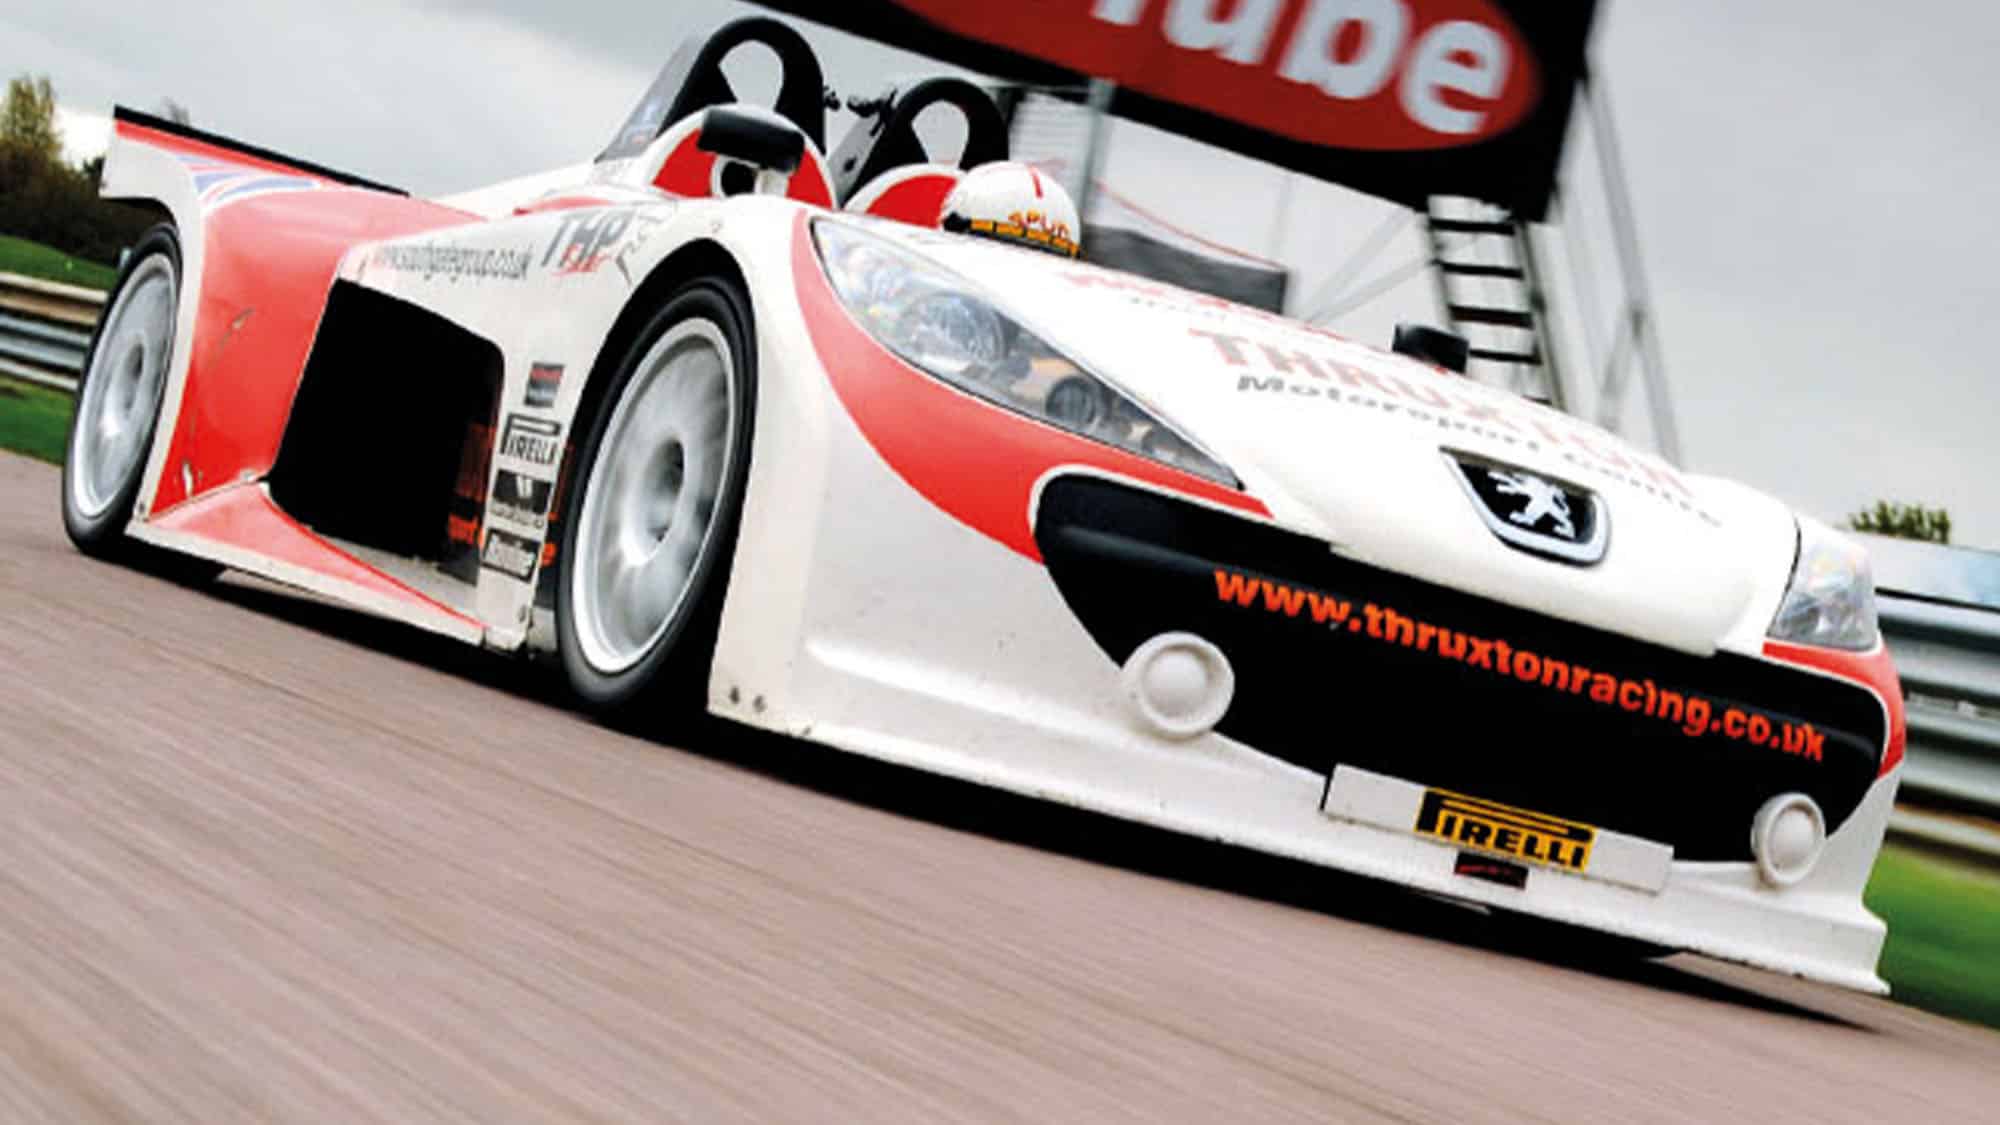 Thruxton driving experience